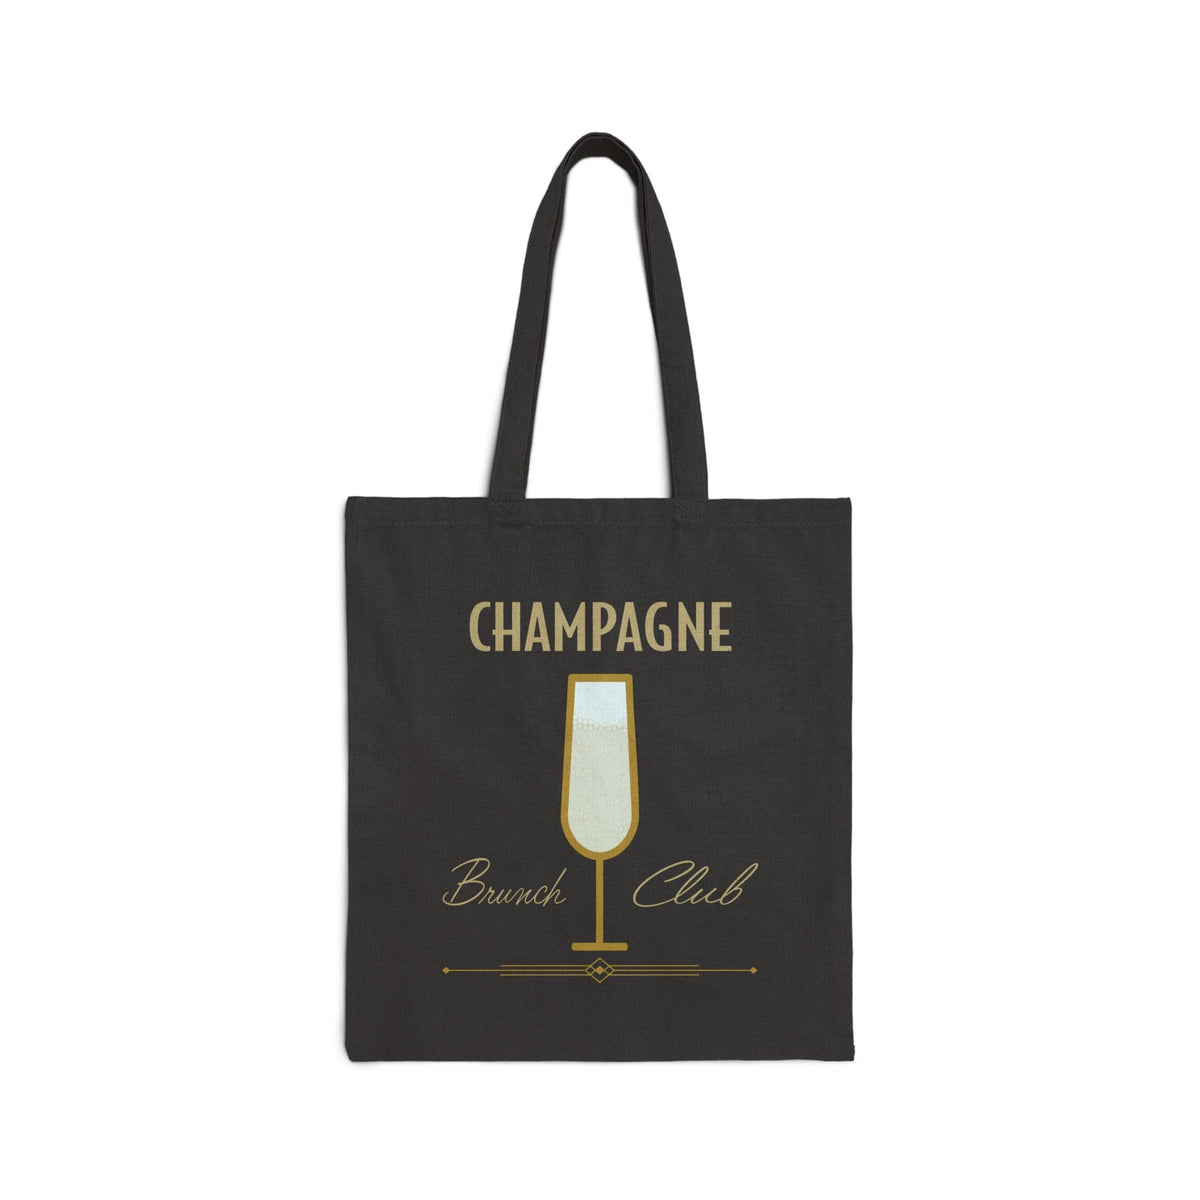 Champagne Brunch Club Canvas Tote | Girls Trip | Reusable Bags | Bottomless Mimosas | Gift for Friend Bags TheFringeCultureCollective